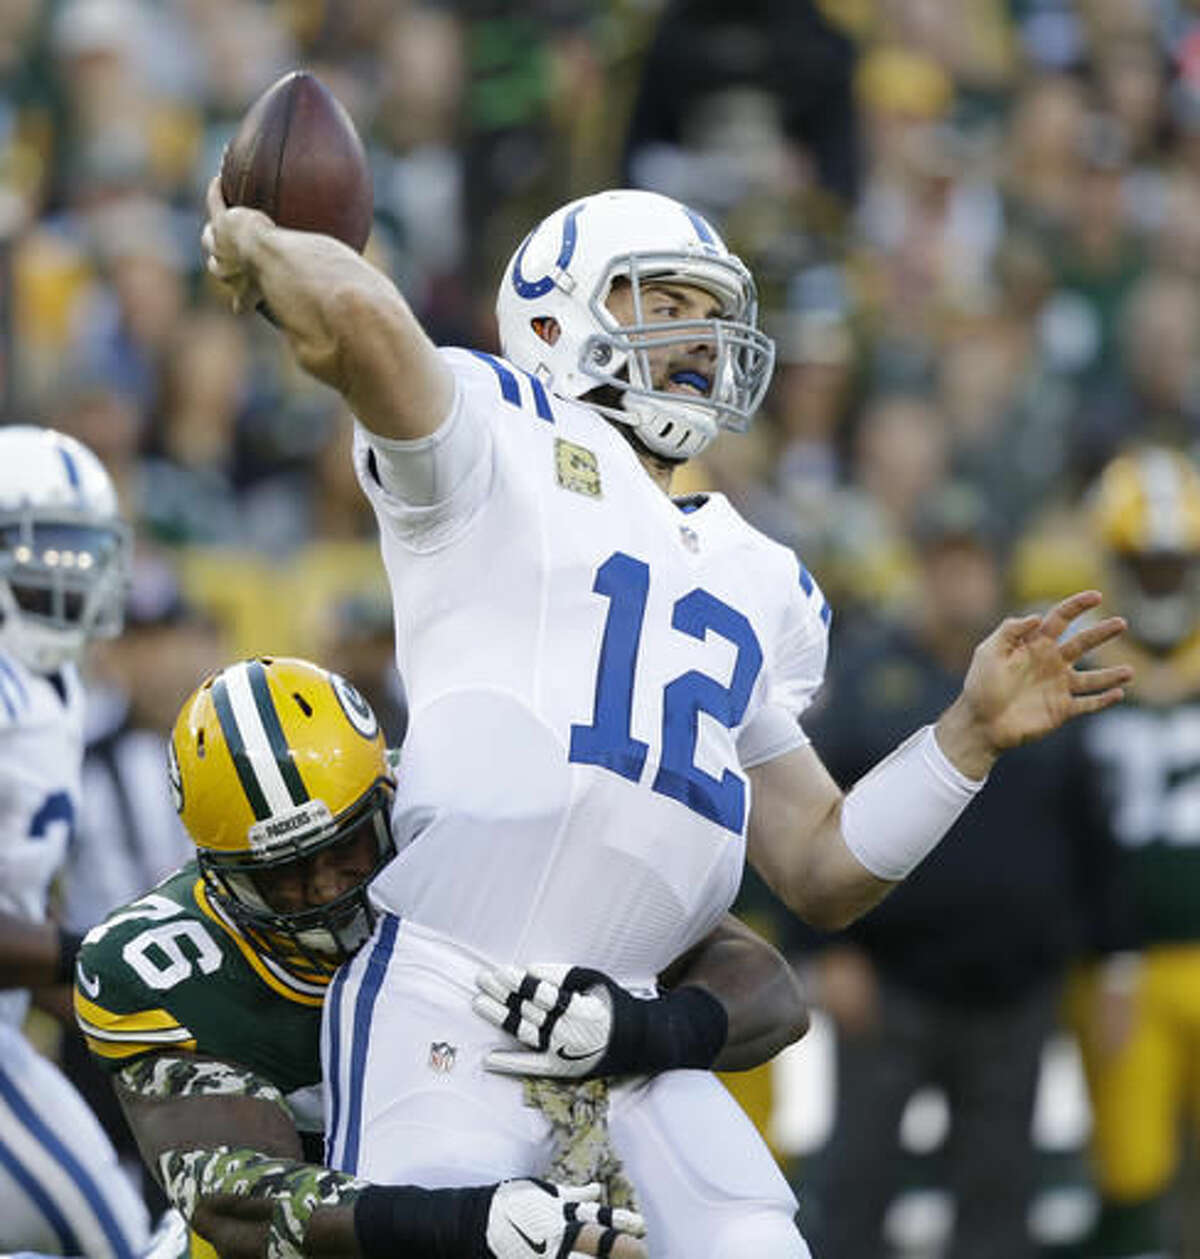 Indianapolis Colts' Andrew Luck is hit by Green Bay Packers' Mike Daniels as he throws during the first half of an NFL football game Sunday, Nov. 6, 2016, in Green Bay, Wis. The pass was intercepted. (AP Photo/Jeffrey Phelps)